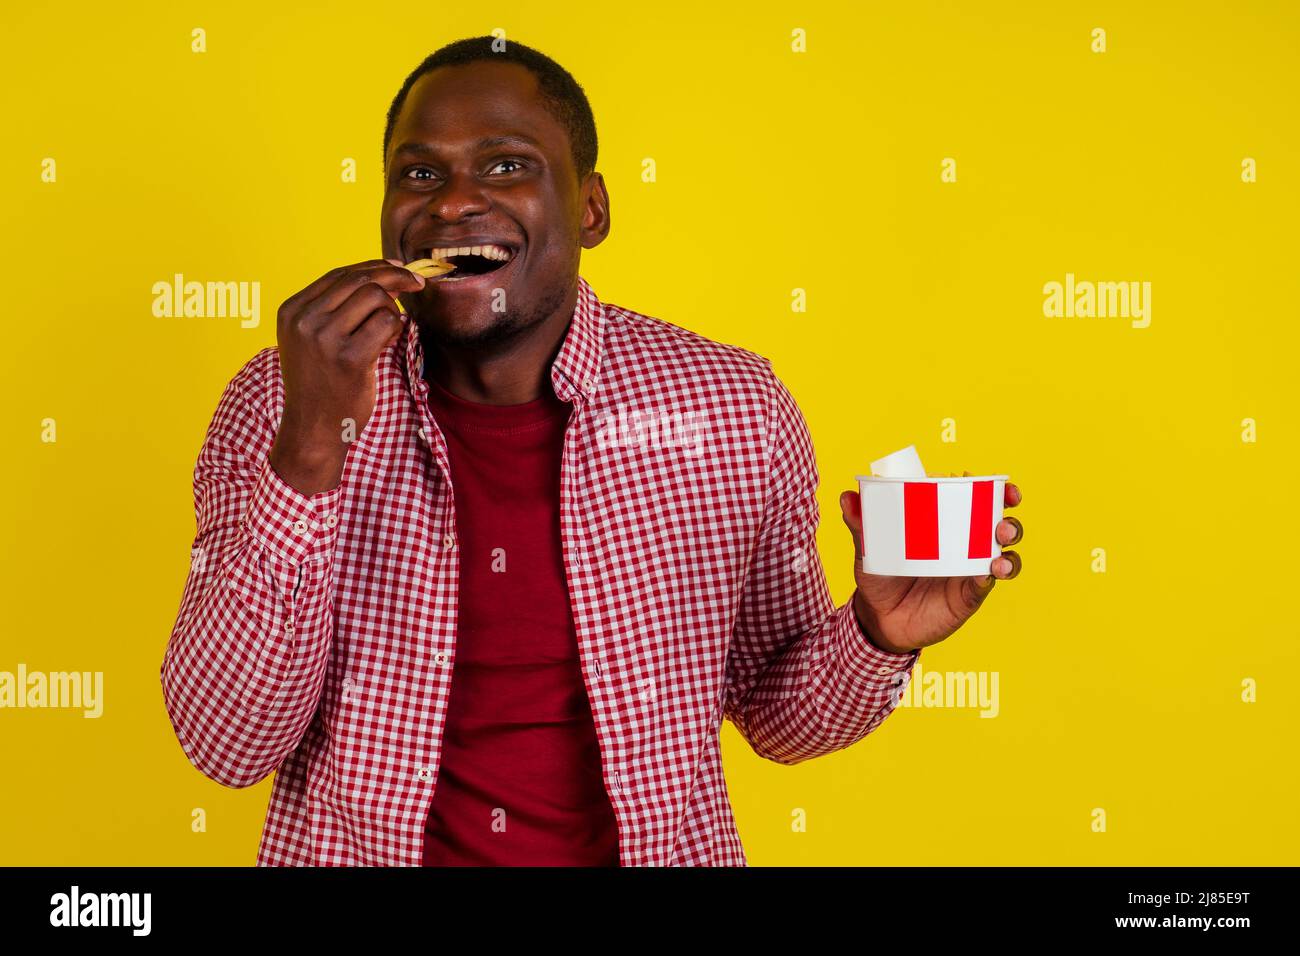 handsome latin man eating fries with appetite and enjoyment in studio yellow background Stock Photo